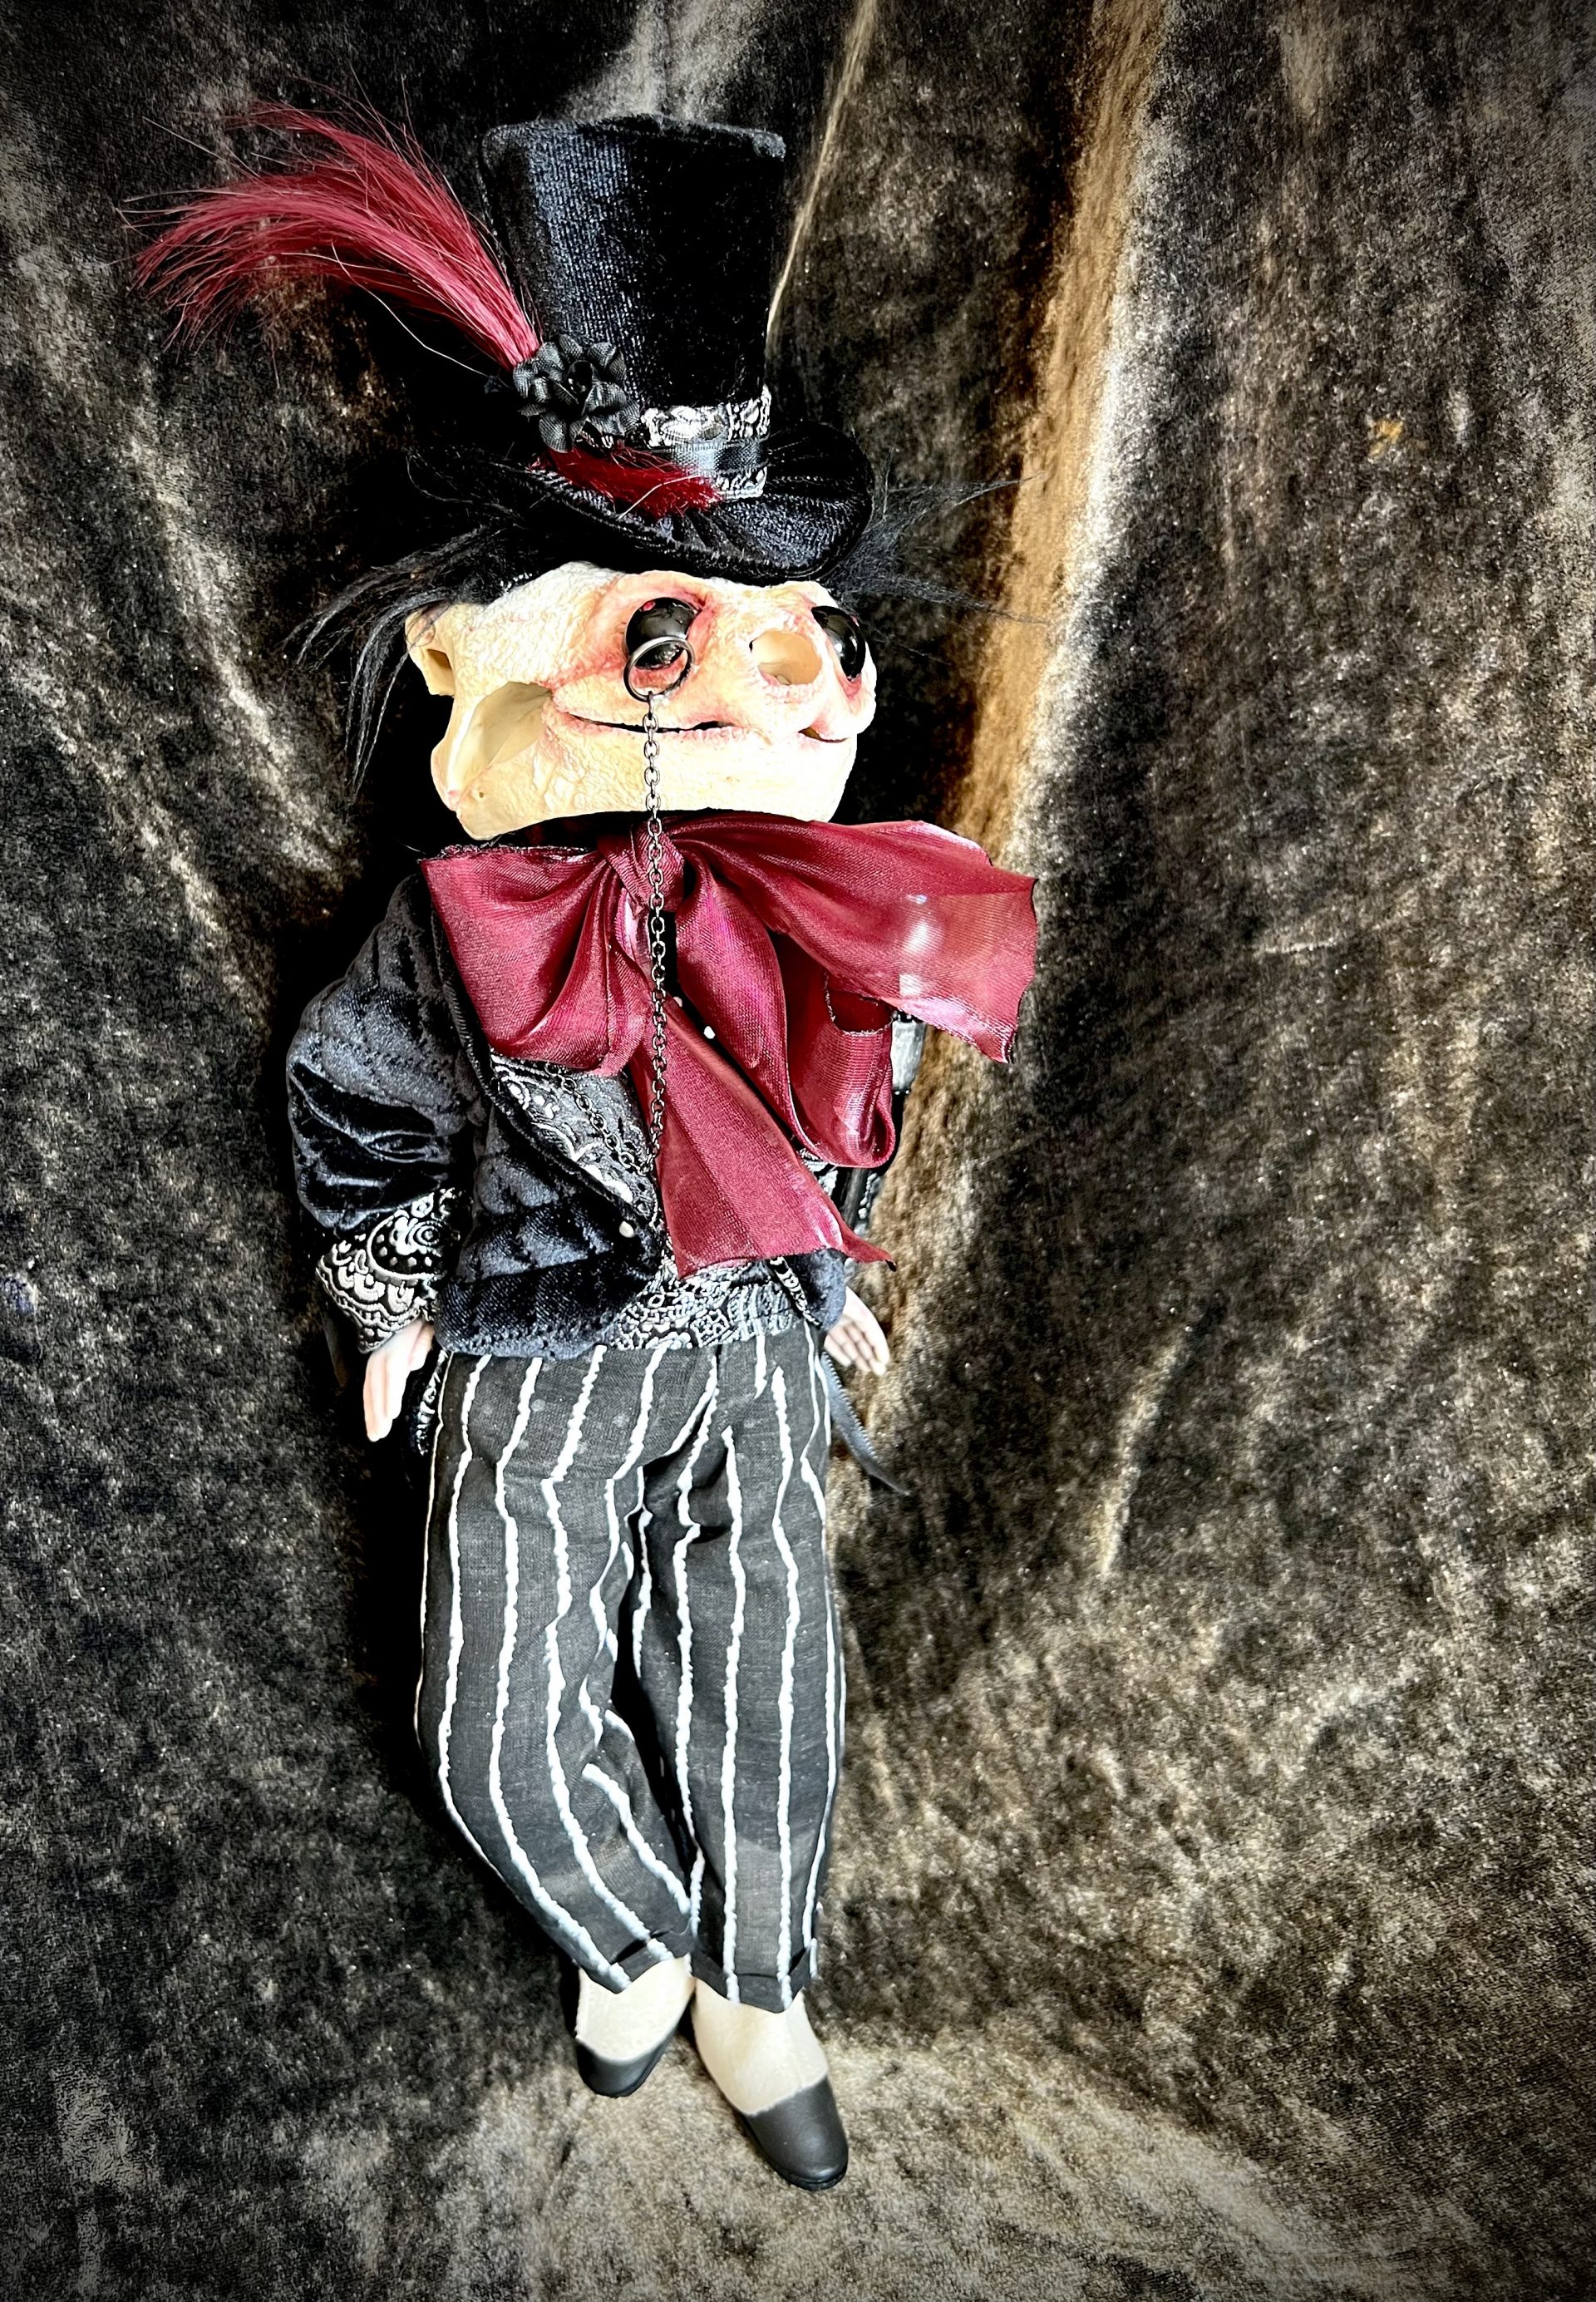 Dapper art doll with turtle skull head, velvet smoking jacket, striped trousers, top hat, walking cane monocle gothic